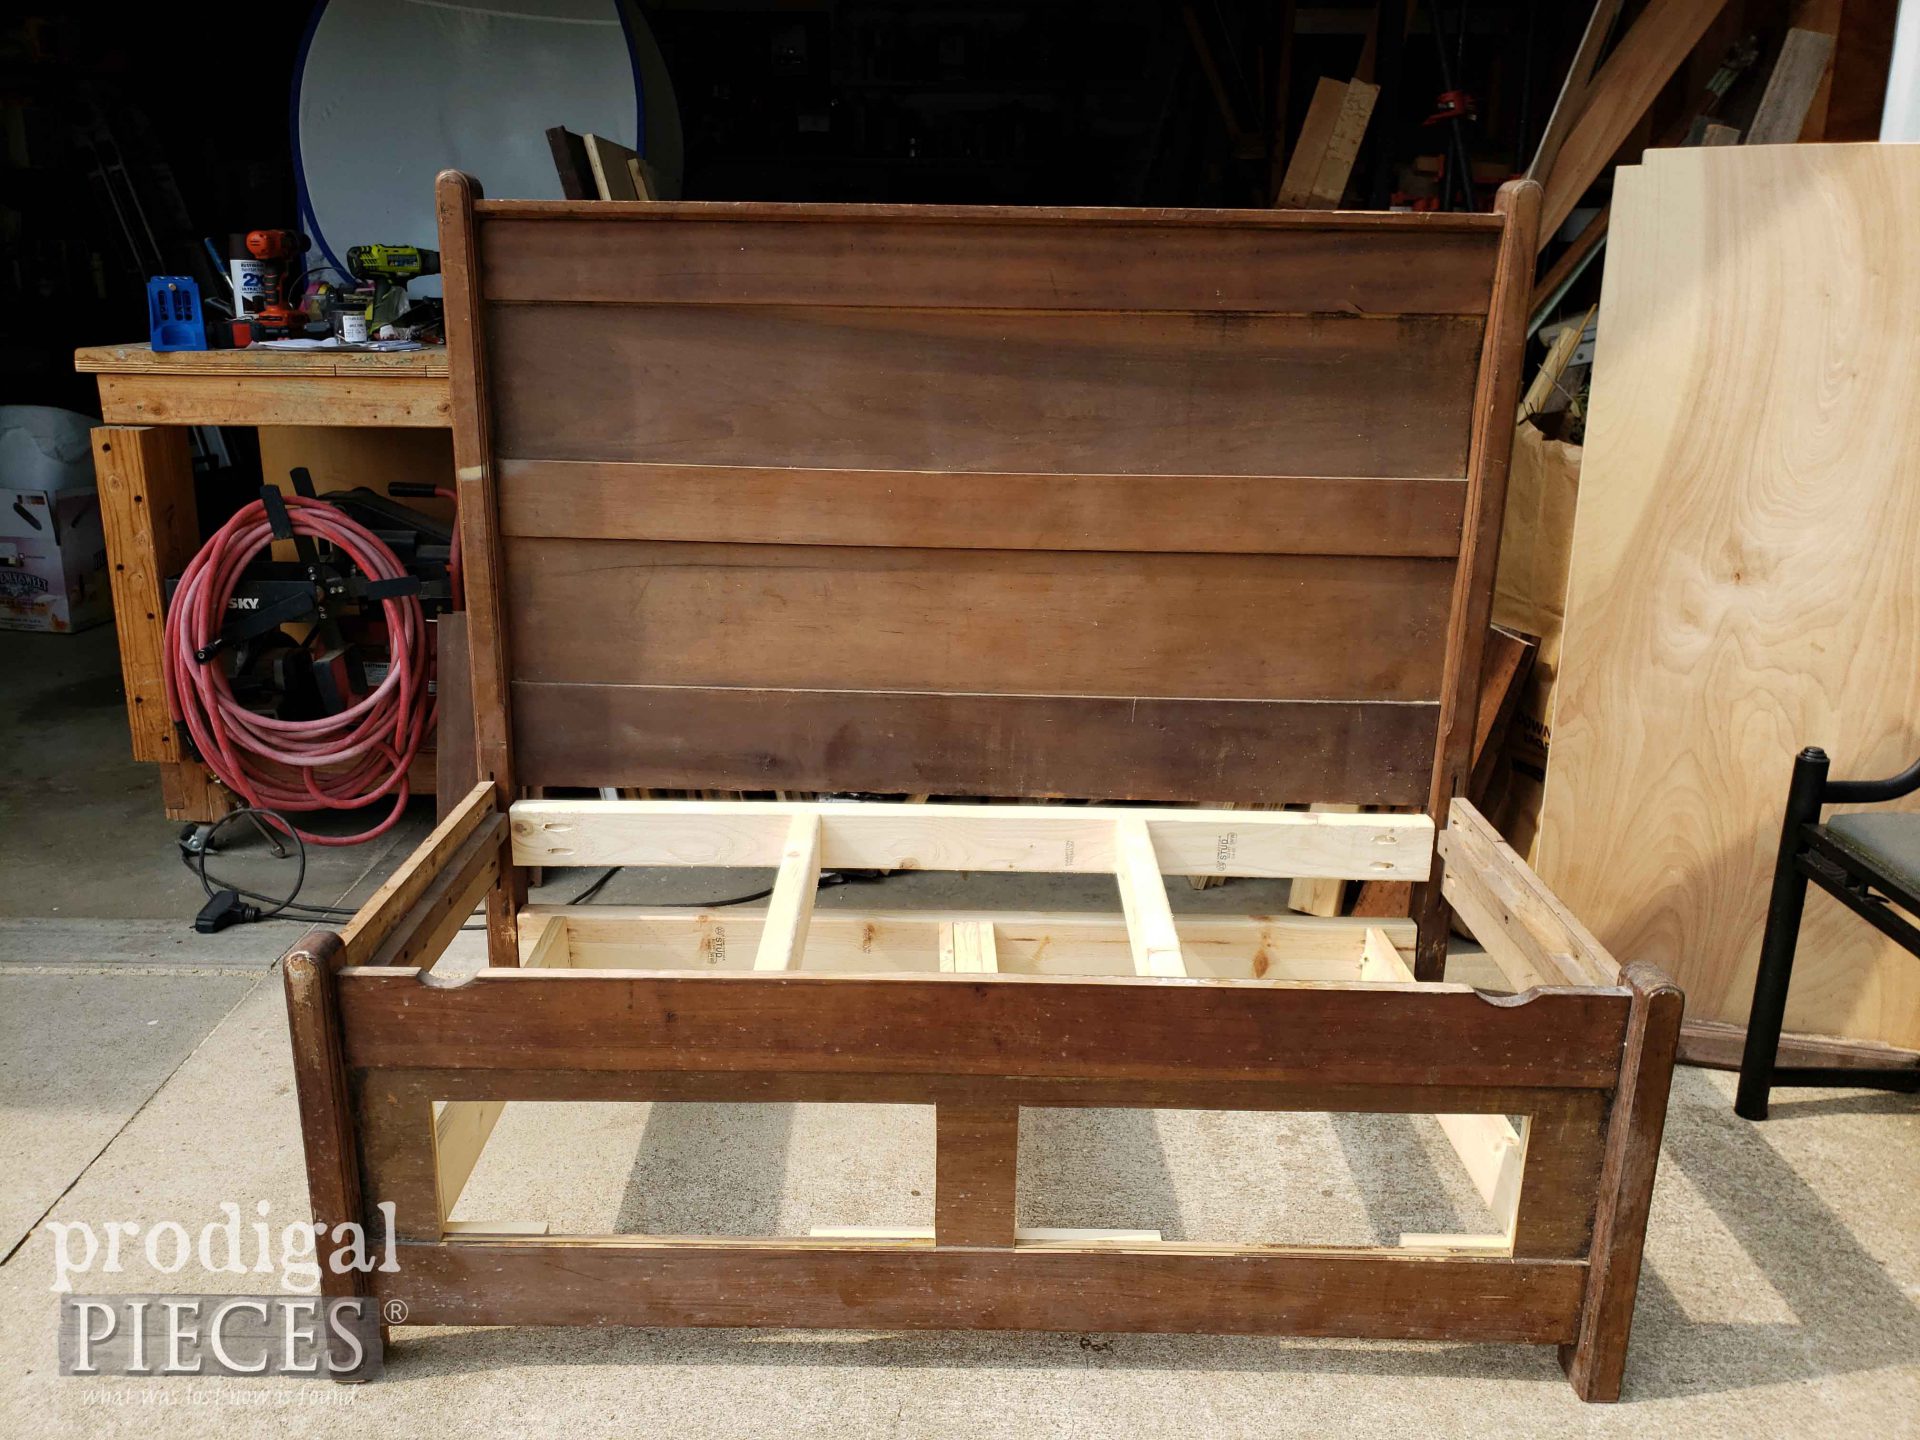 Built-In Bench from Antique Bed | DIY Floating Floor | prodigalpieces.com